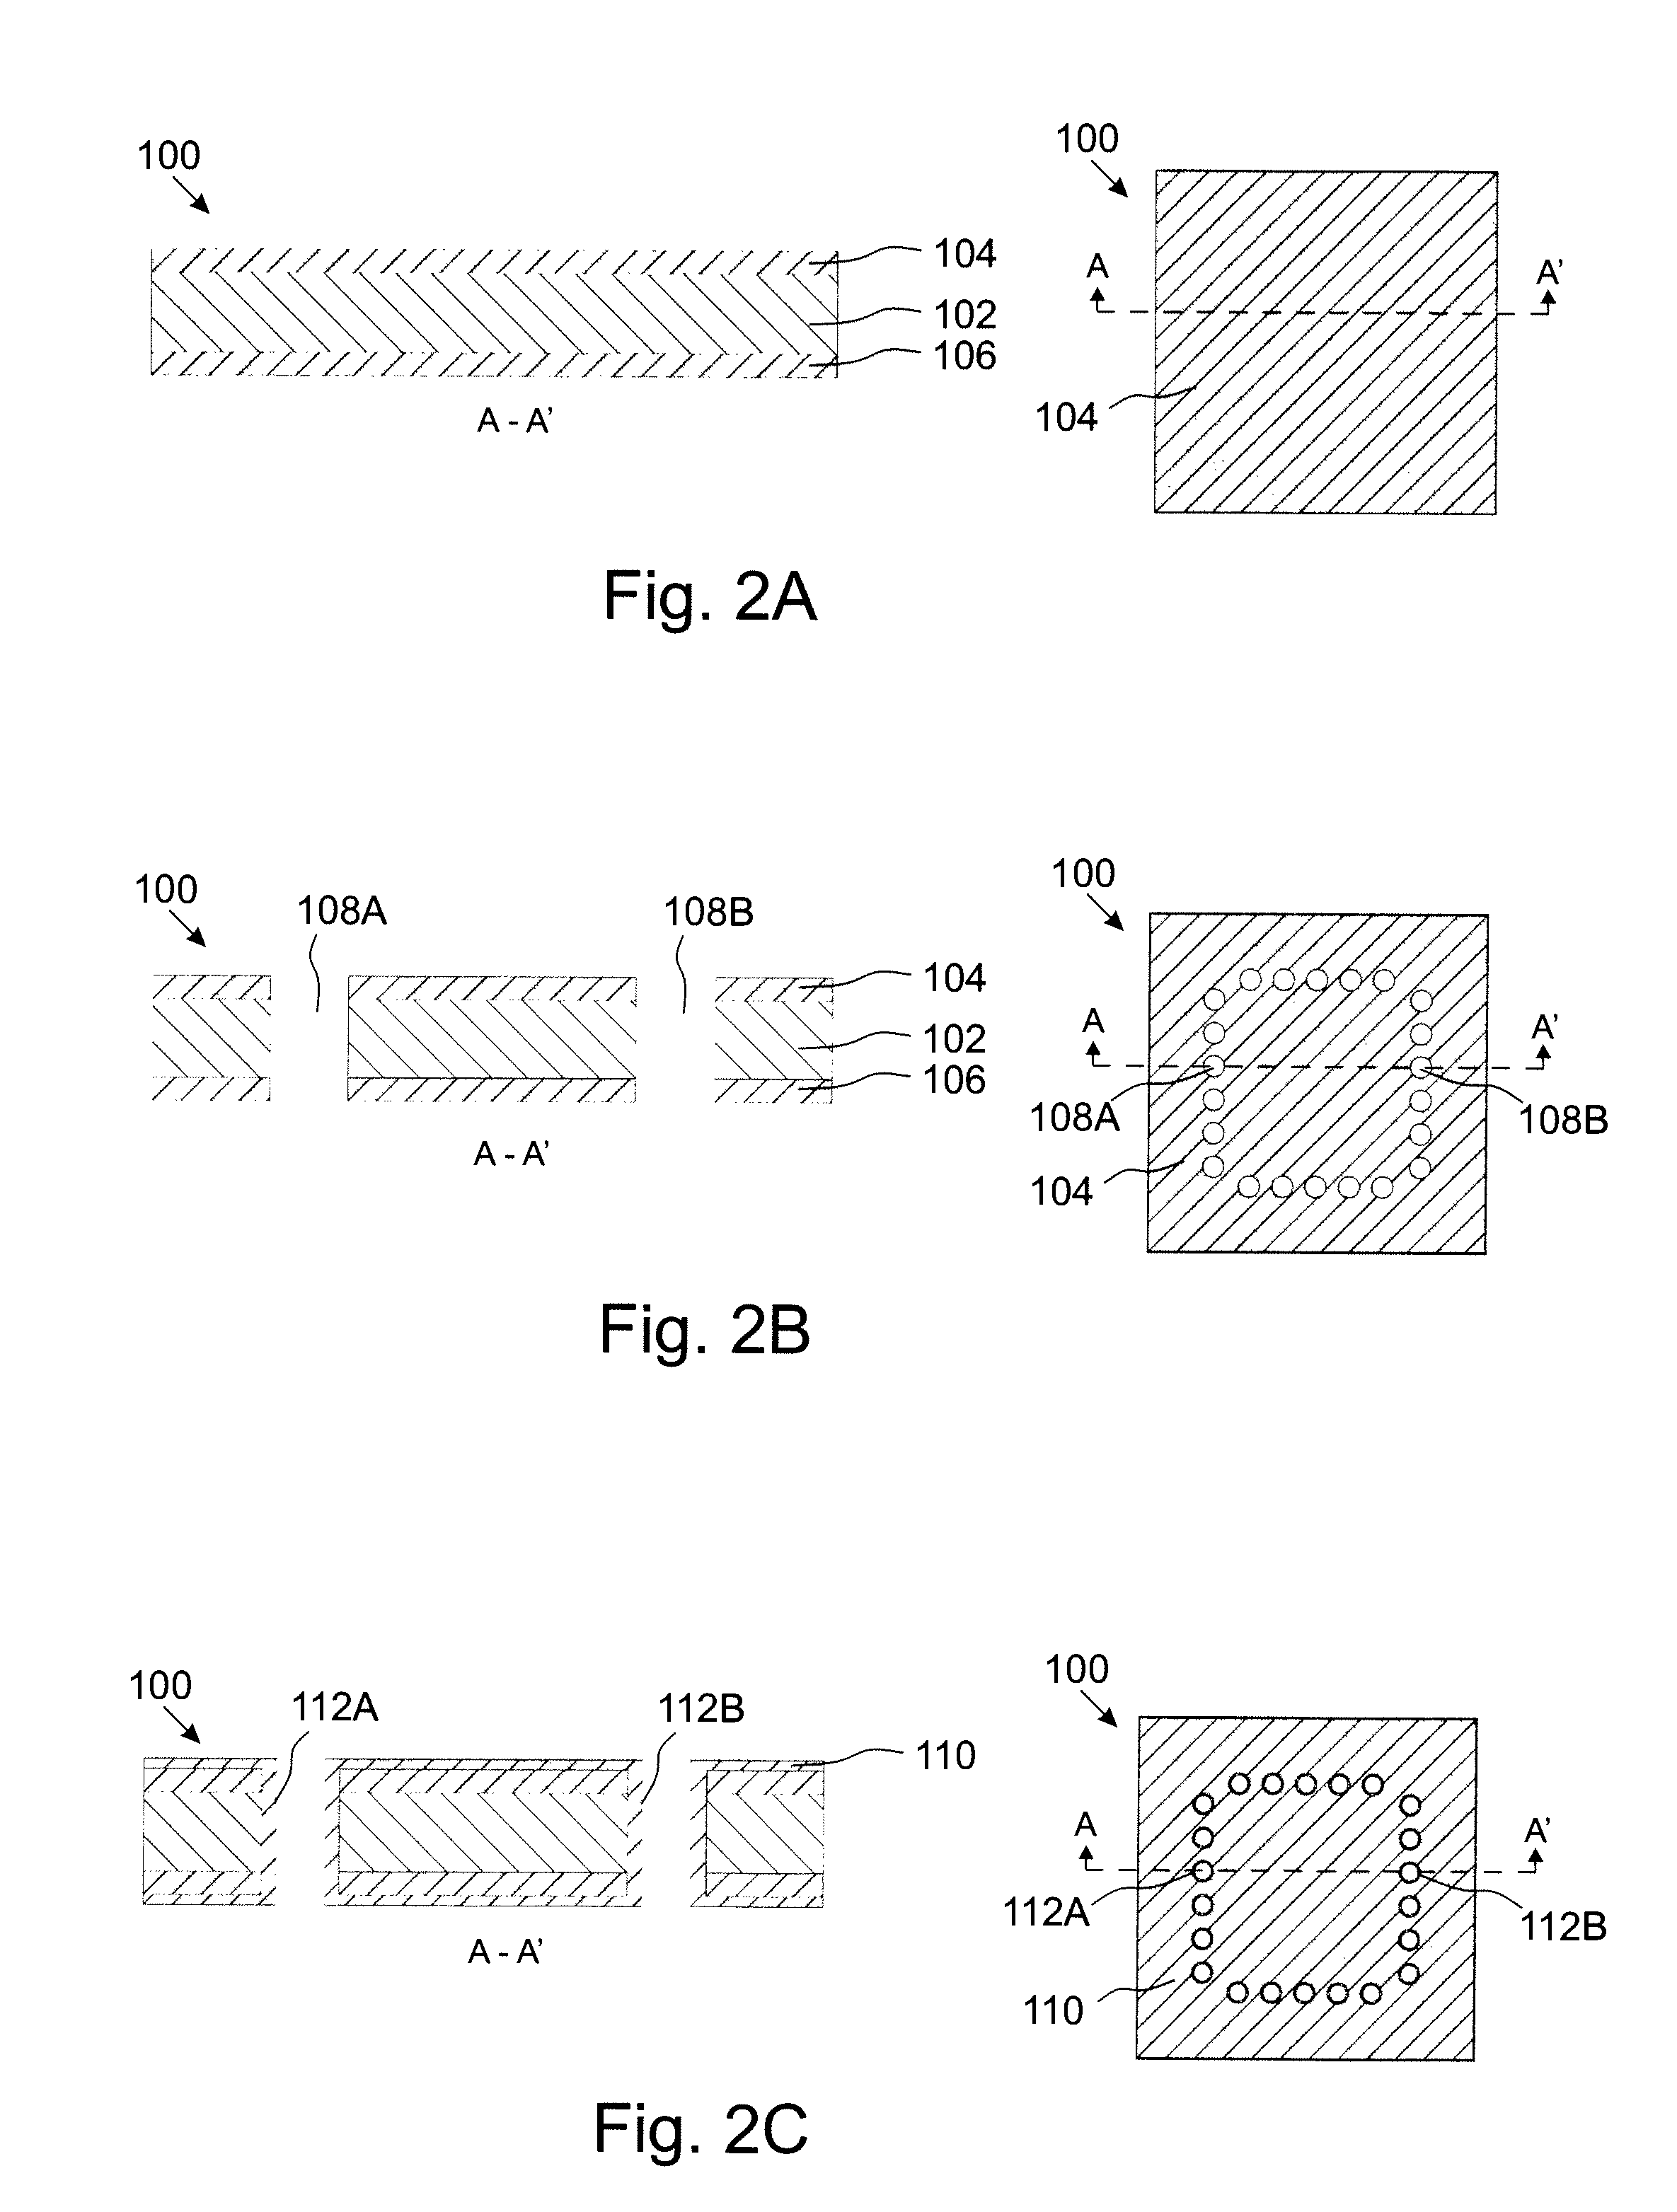 Electronic module with feed through conductor between wiring patterns